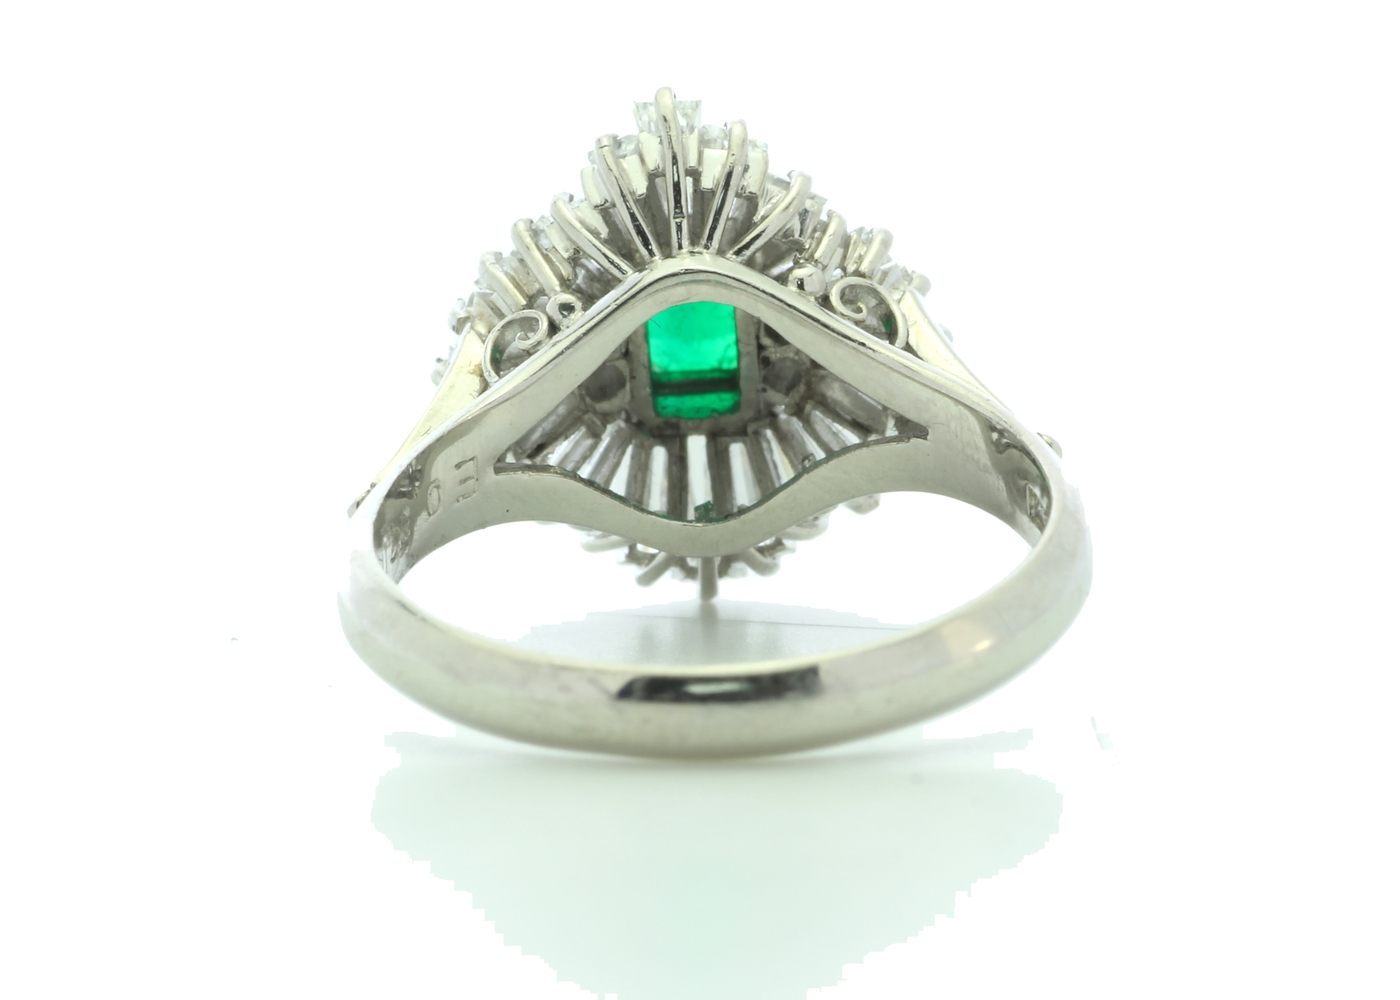 Platinum Cluster Diamond and Emerald Ring (E 0.37) 1.00 Carats - Image 3 of 5